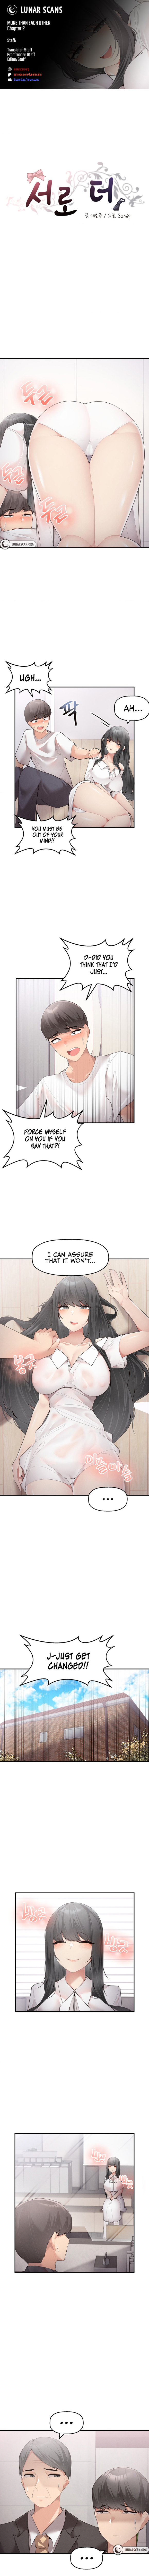 Panel Image 1 for chapter 2 of manhwa More Than Each Other on read.oppai.stream